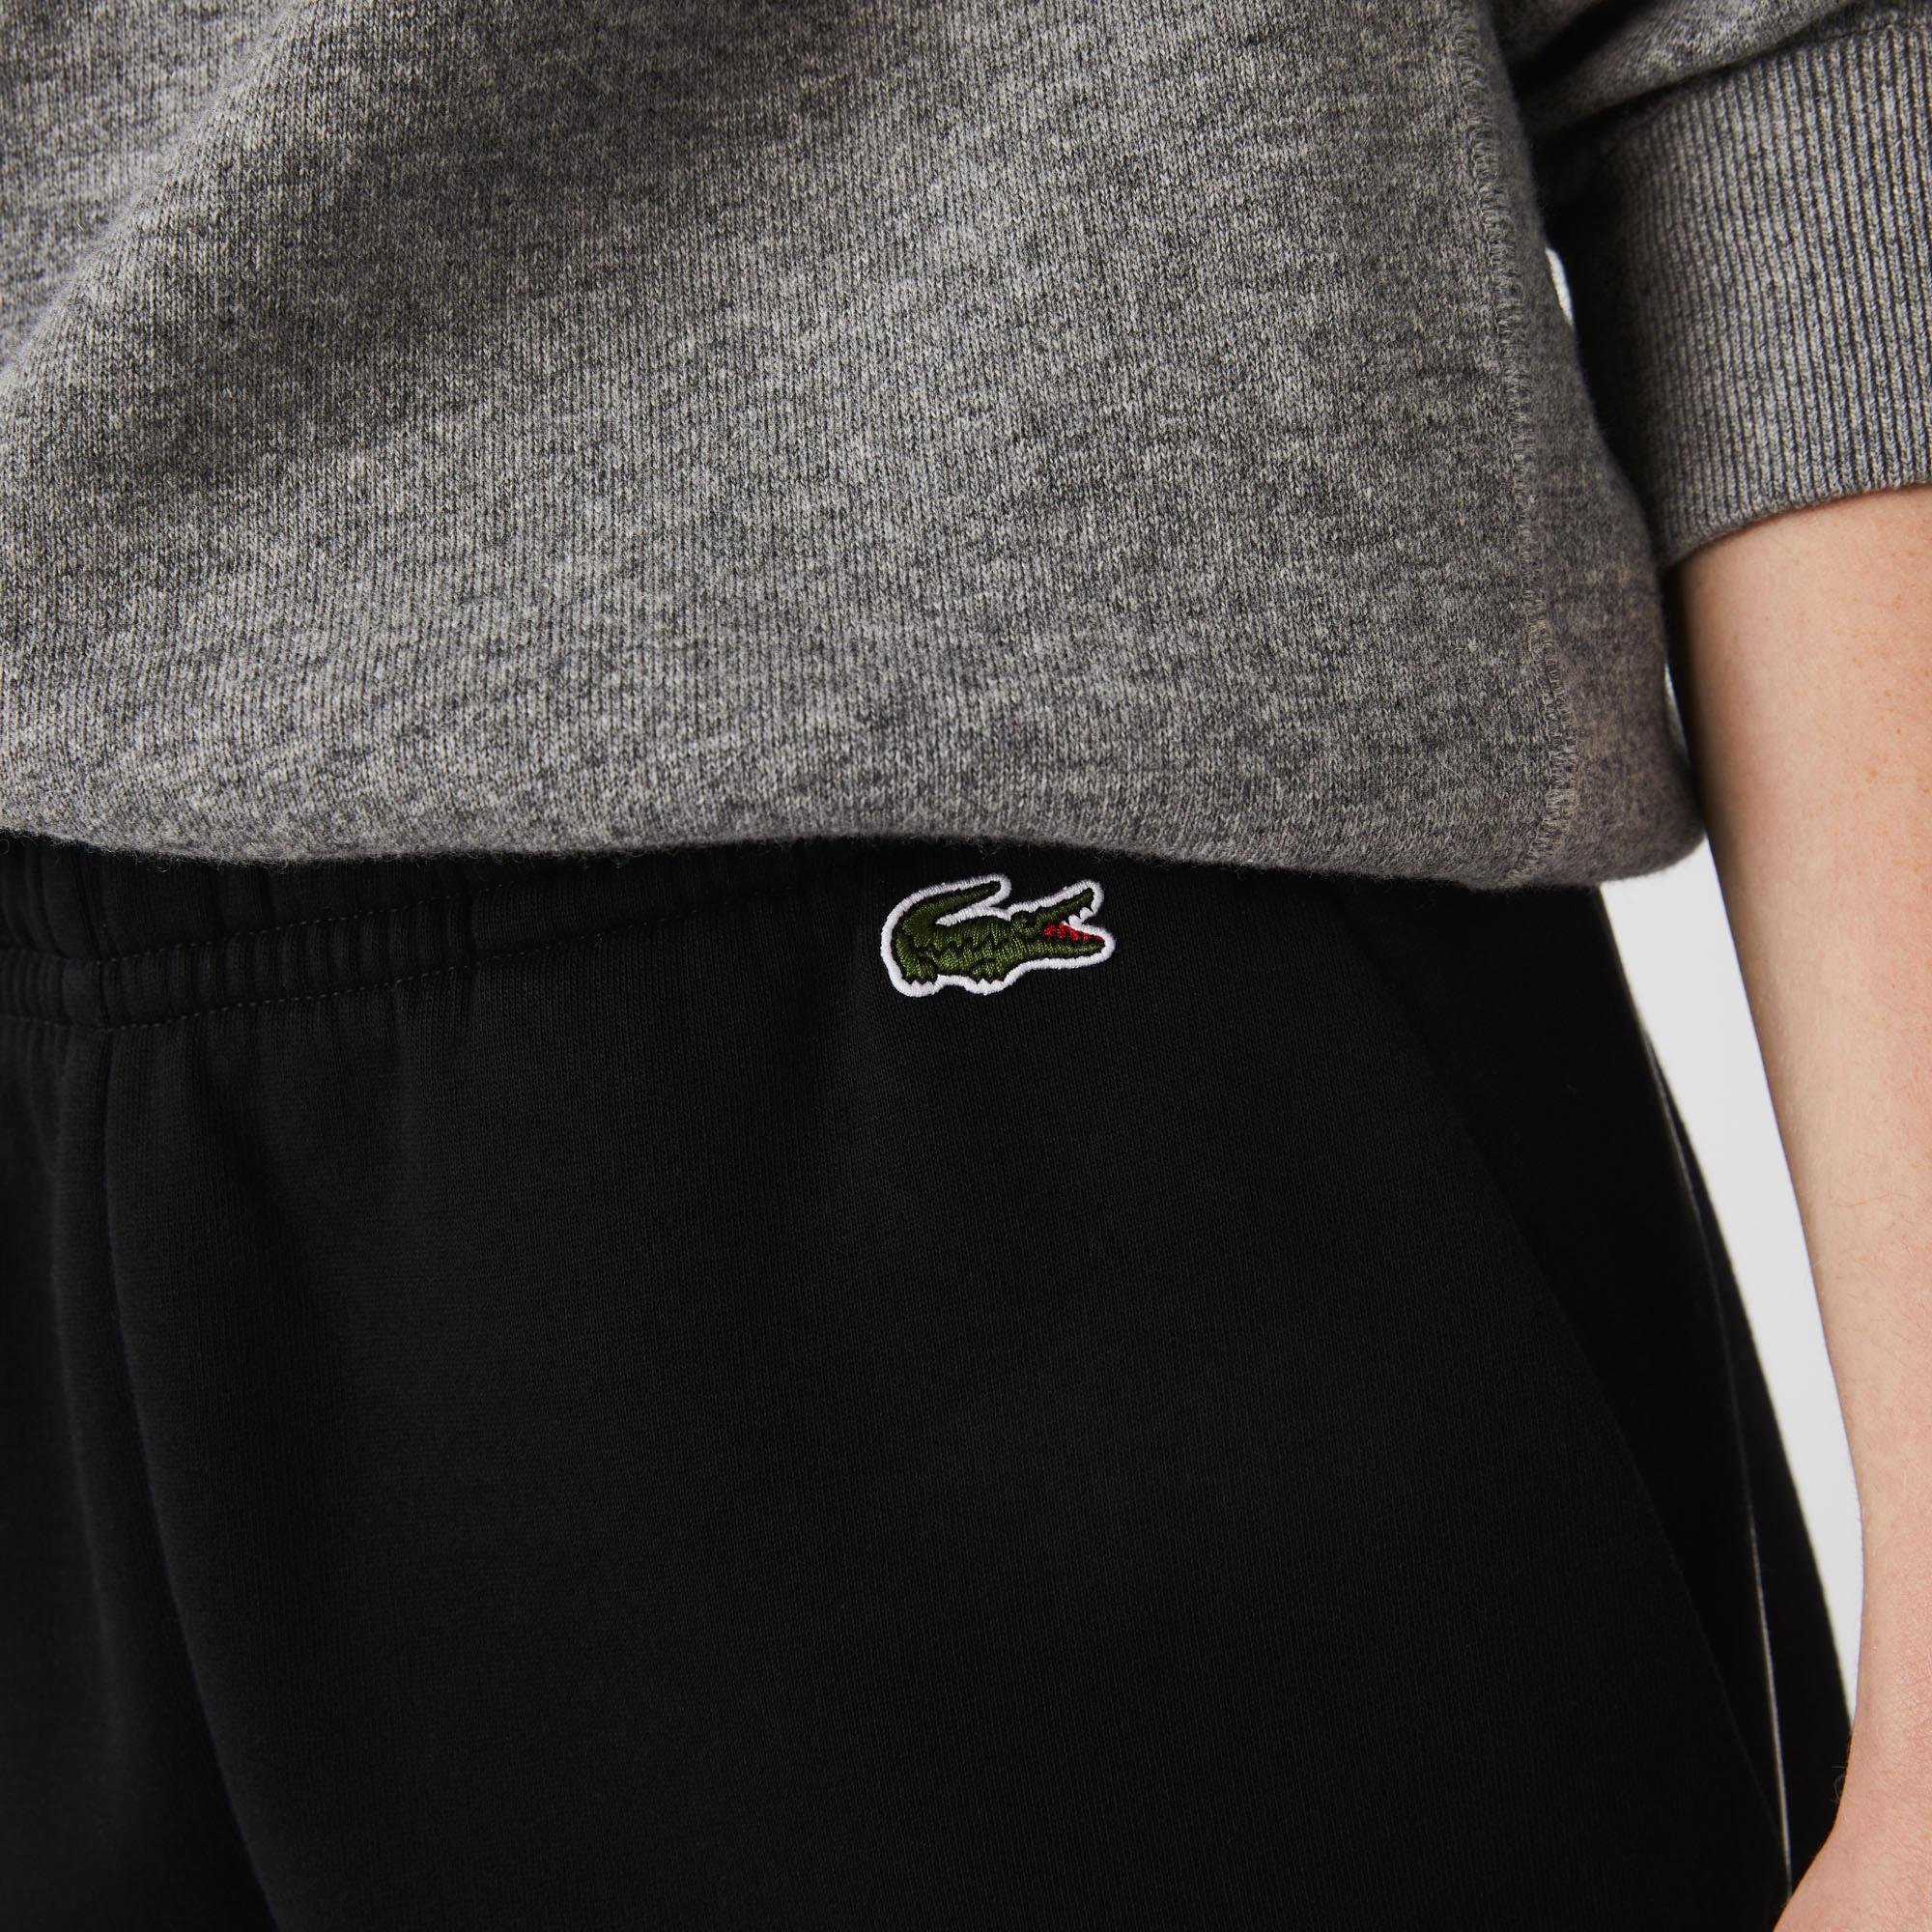 Lacoste Men's  Printed Bands Trackpants